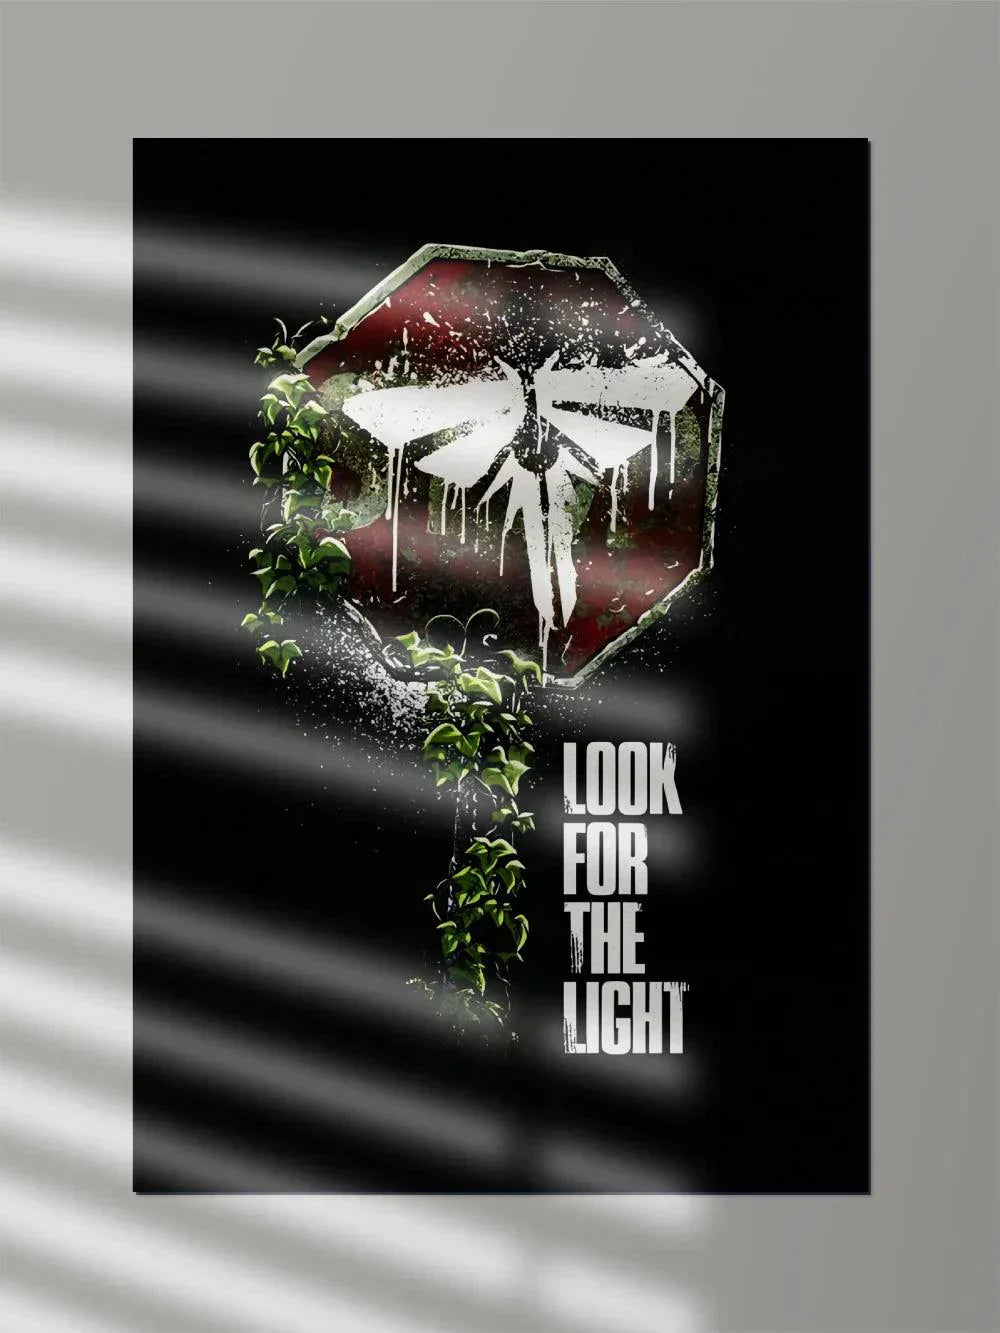 LOOK FOR THE LIGHT MOTIVATIONAL POSTER - Poster Wiz